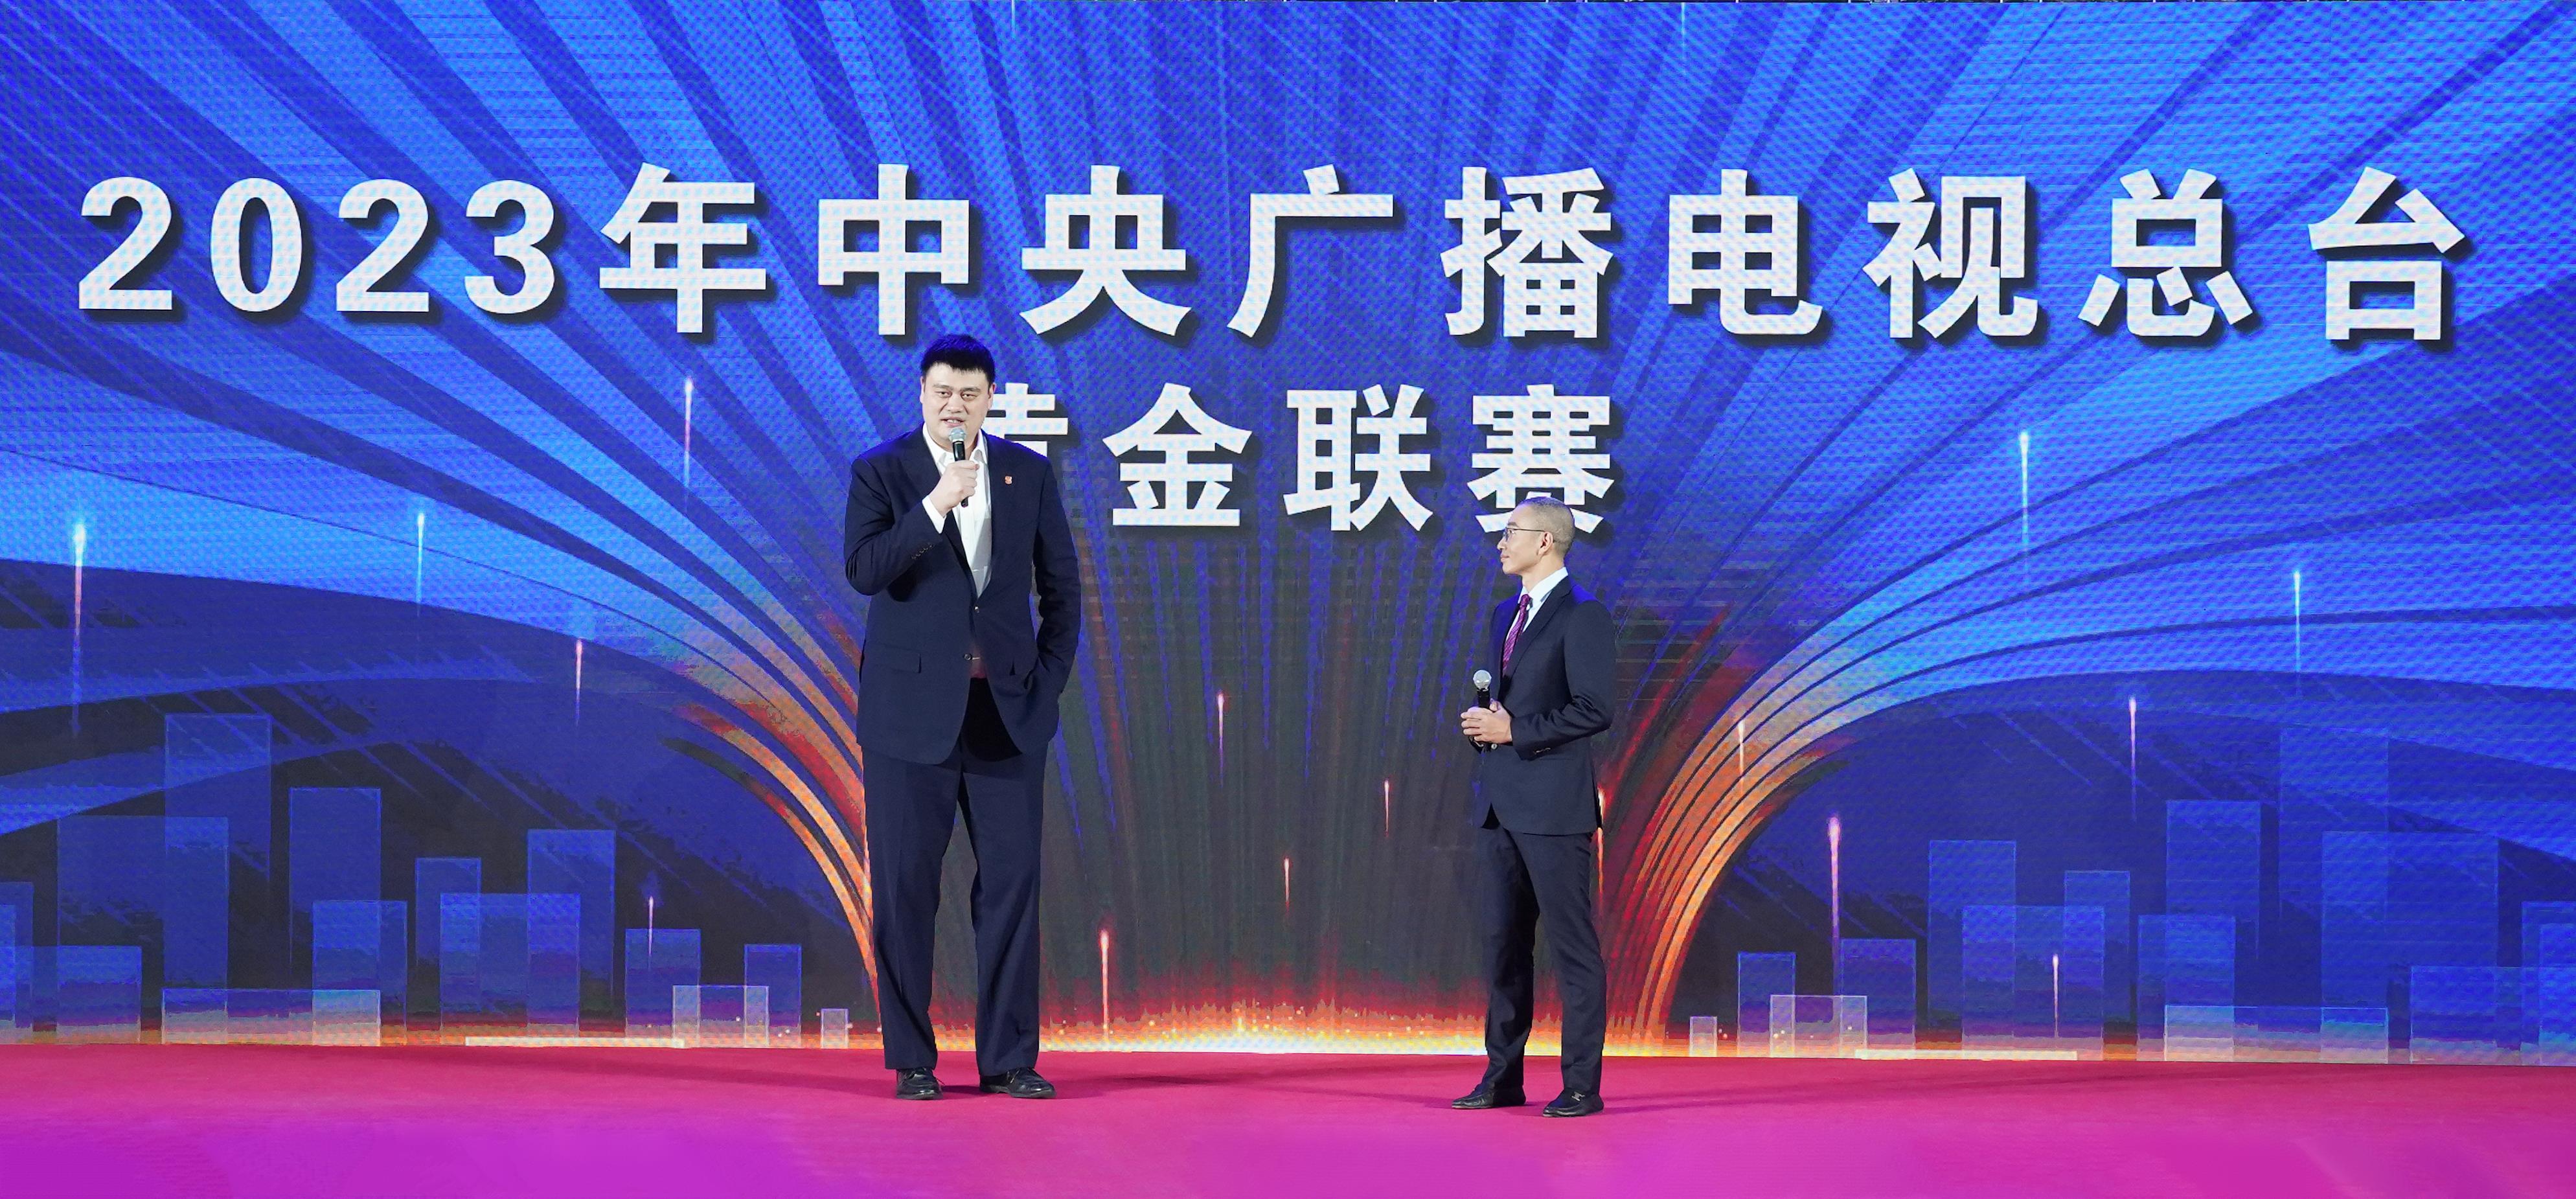 Yao Ming (L), president of the Chinese Basketball Association, speaks at the ceremony held by CMG to release the broadcasting plans of 